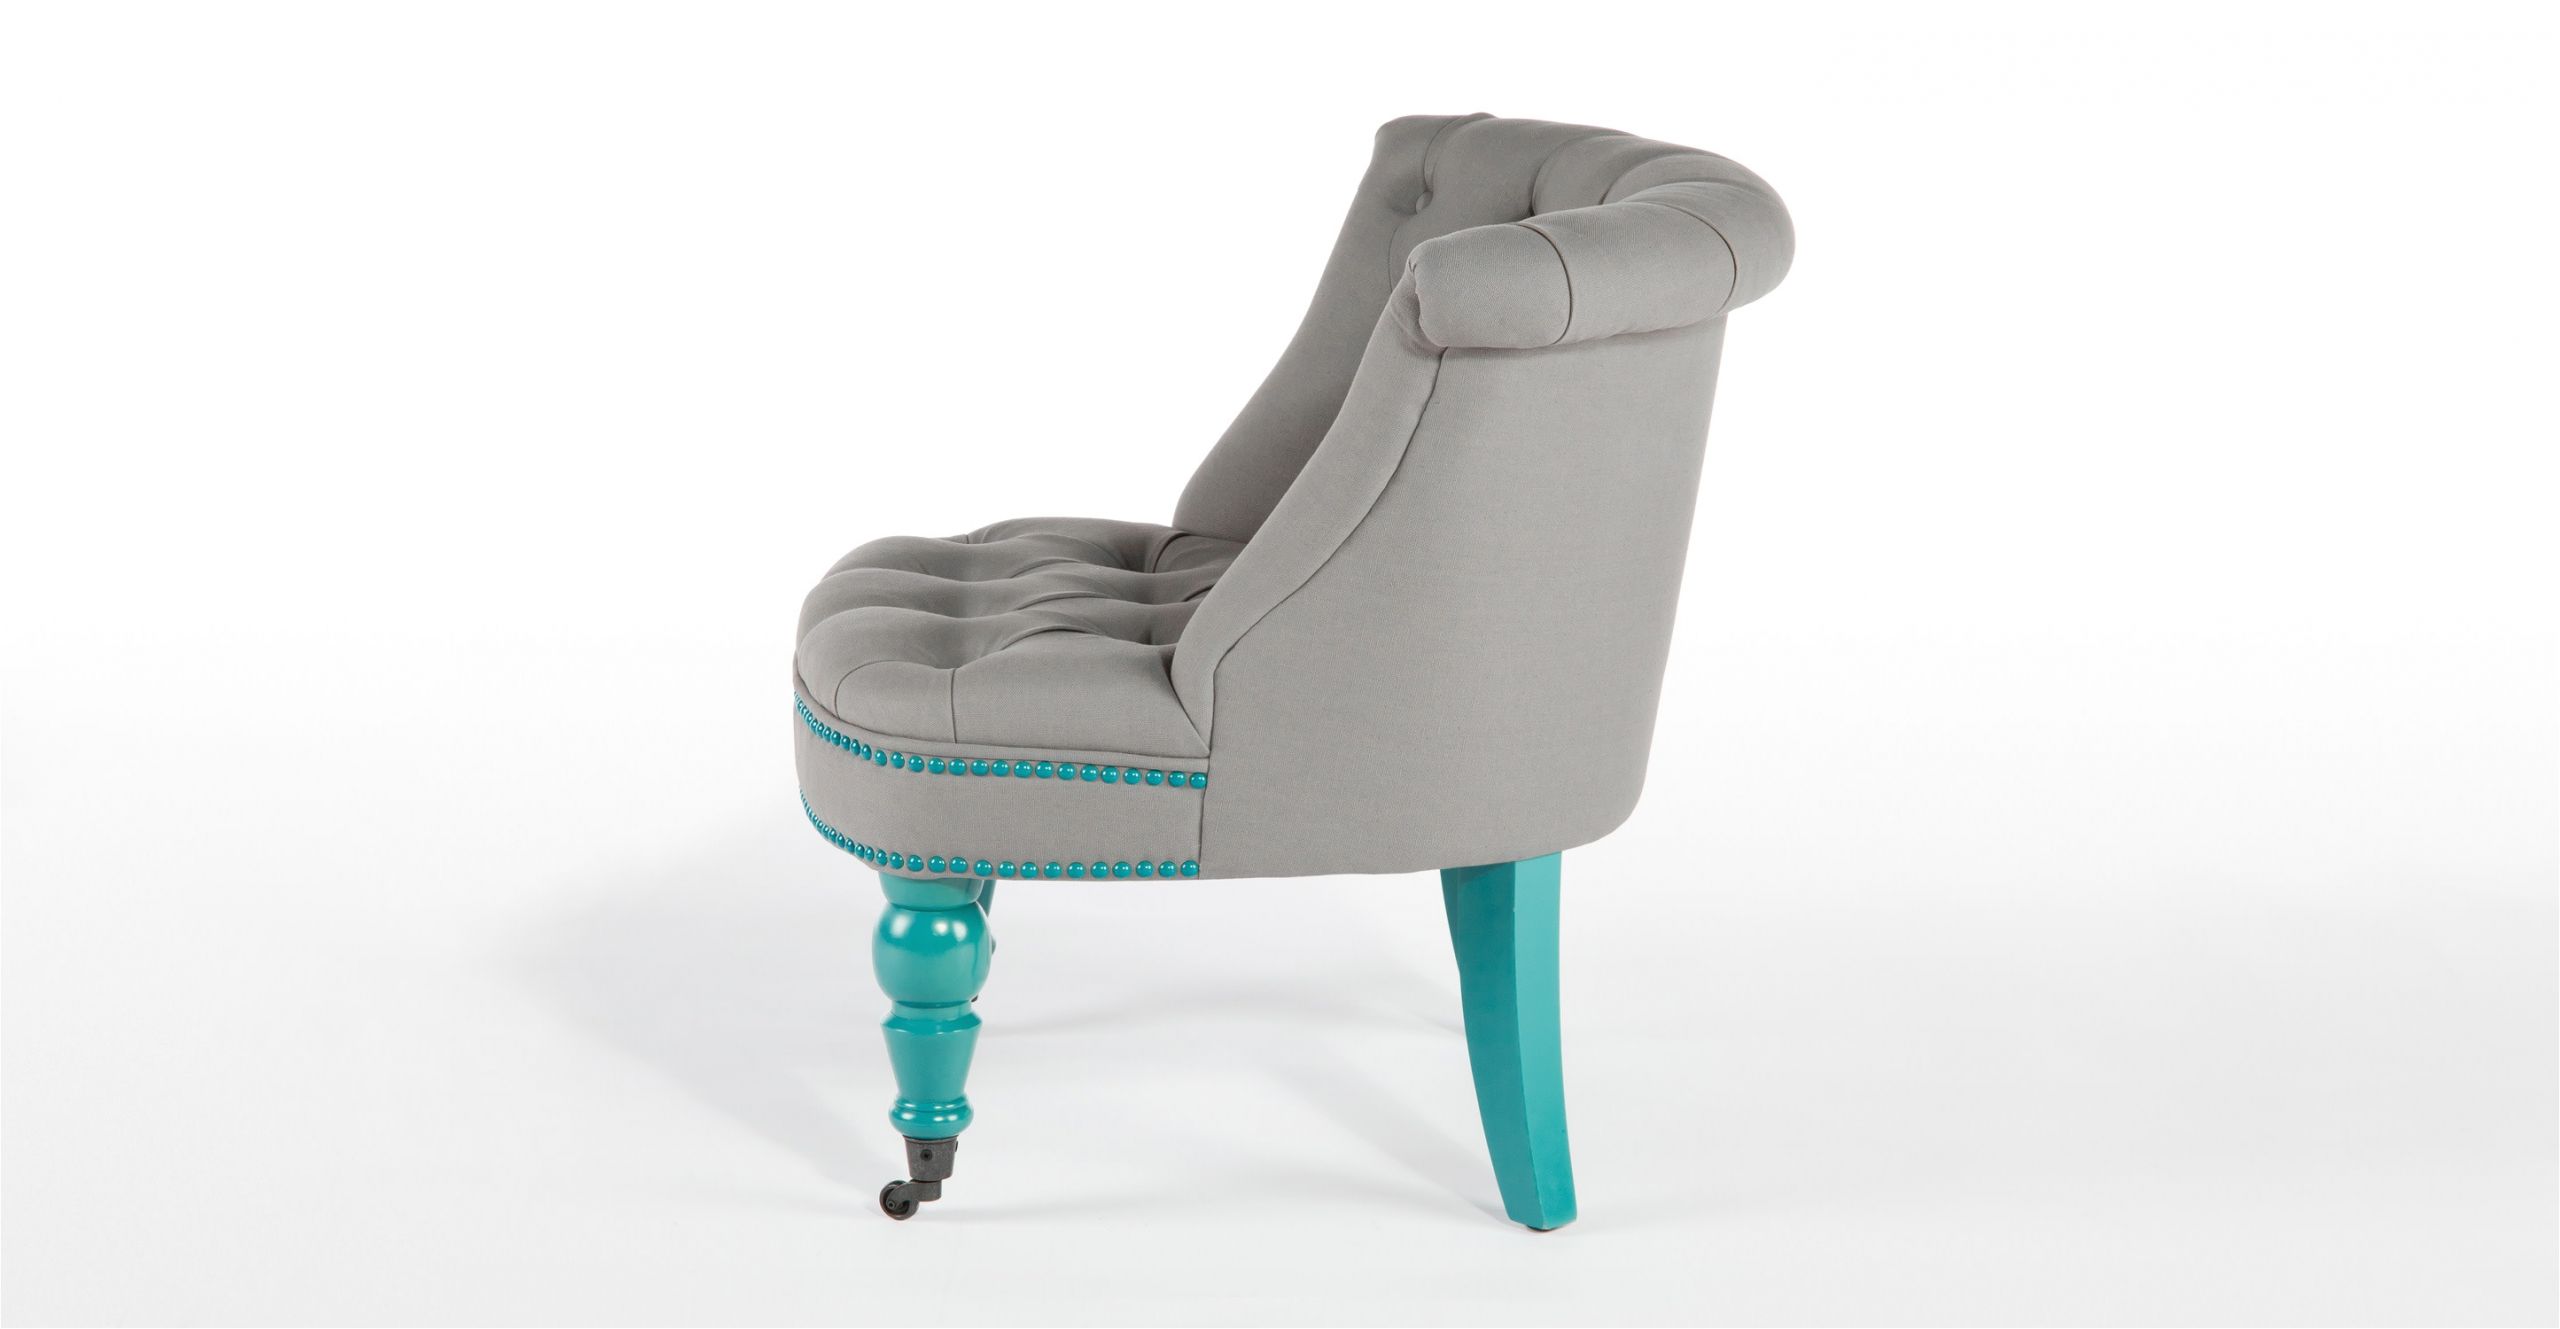 bouji chair oxford grey and turquoise blue